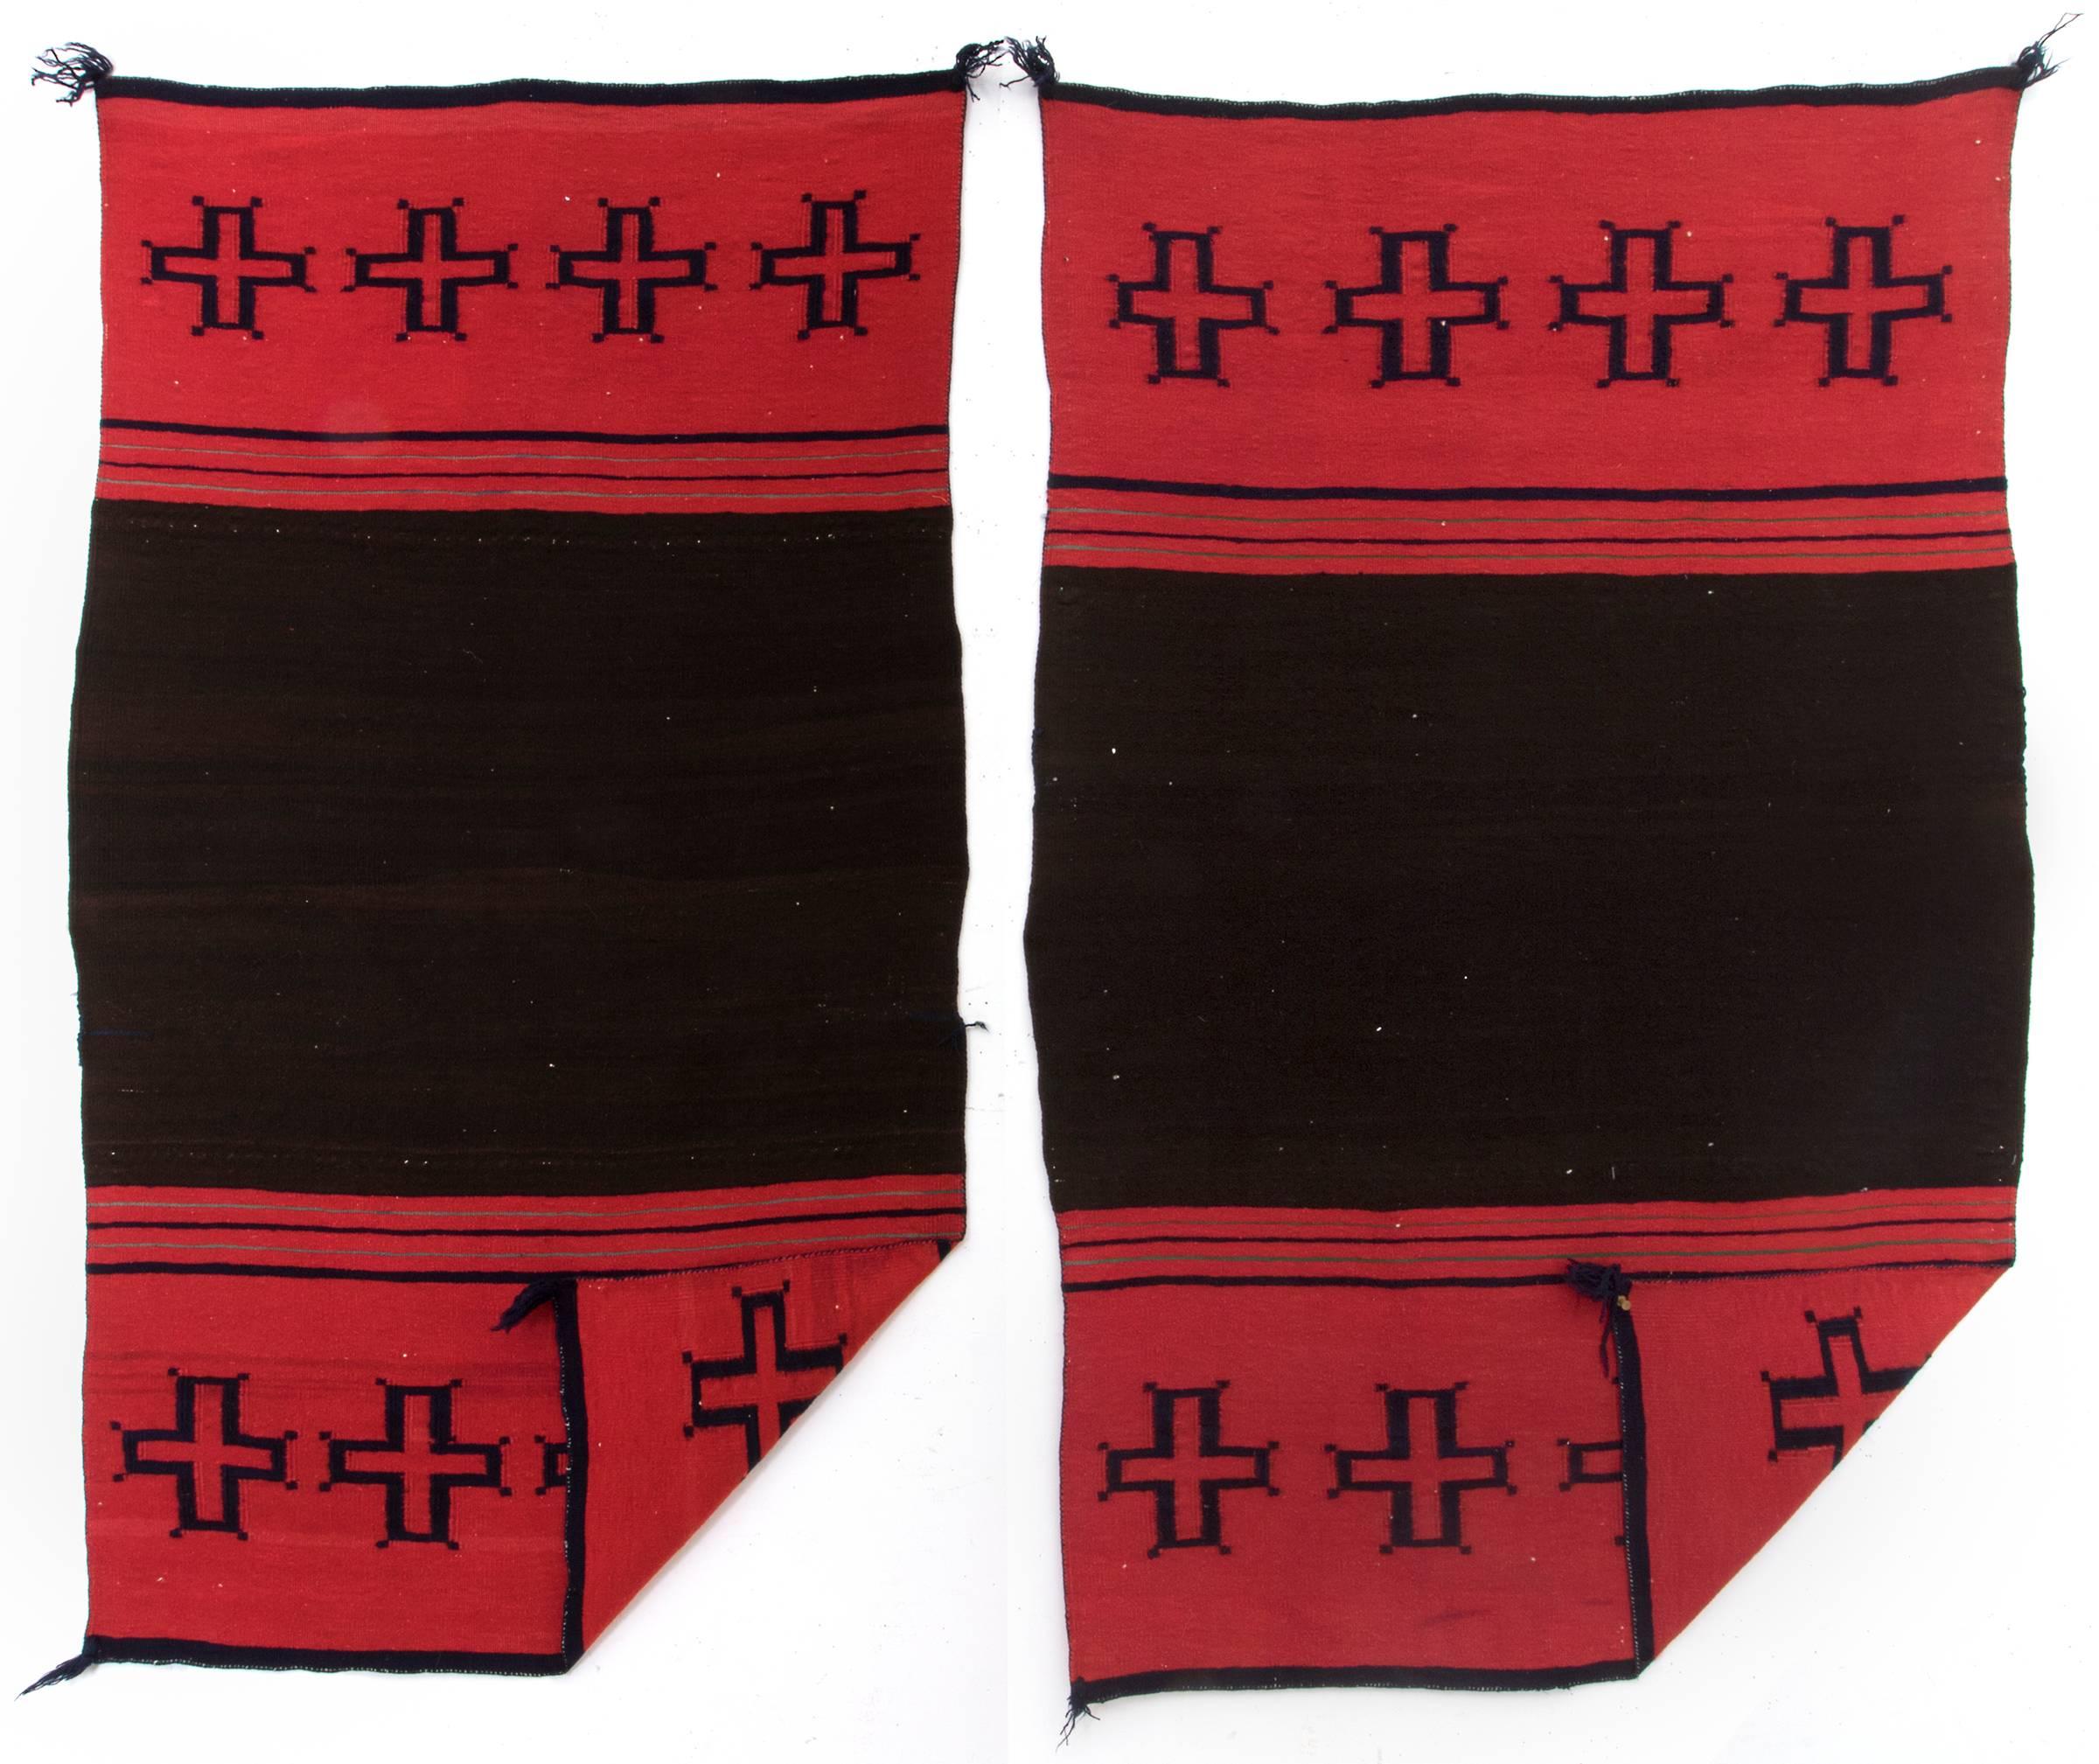 Pair of Classic period (pre-reservation era) dress halves. Woven of native hand-spun wool in natural black/brown fleece. The red was achieved with a combination of natural dye ( 80% Lac and 15% Cochineal).

Each dress half measures 54 x 31.5